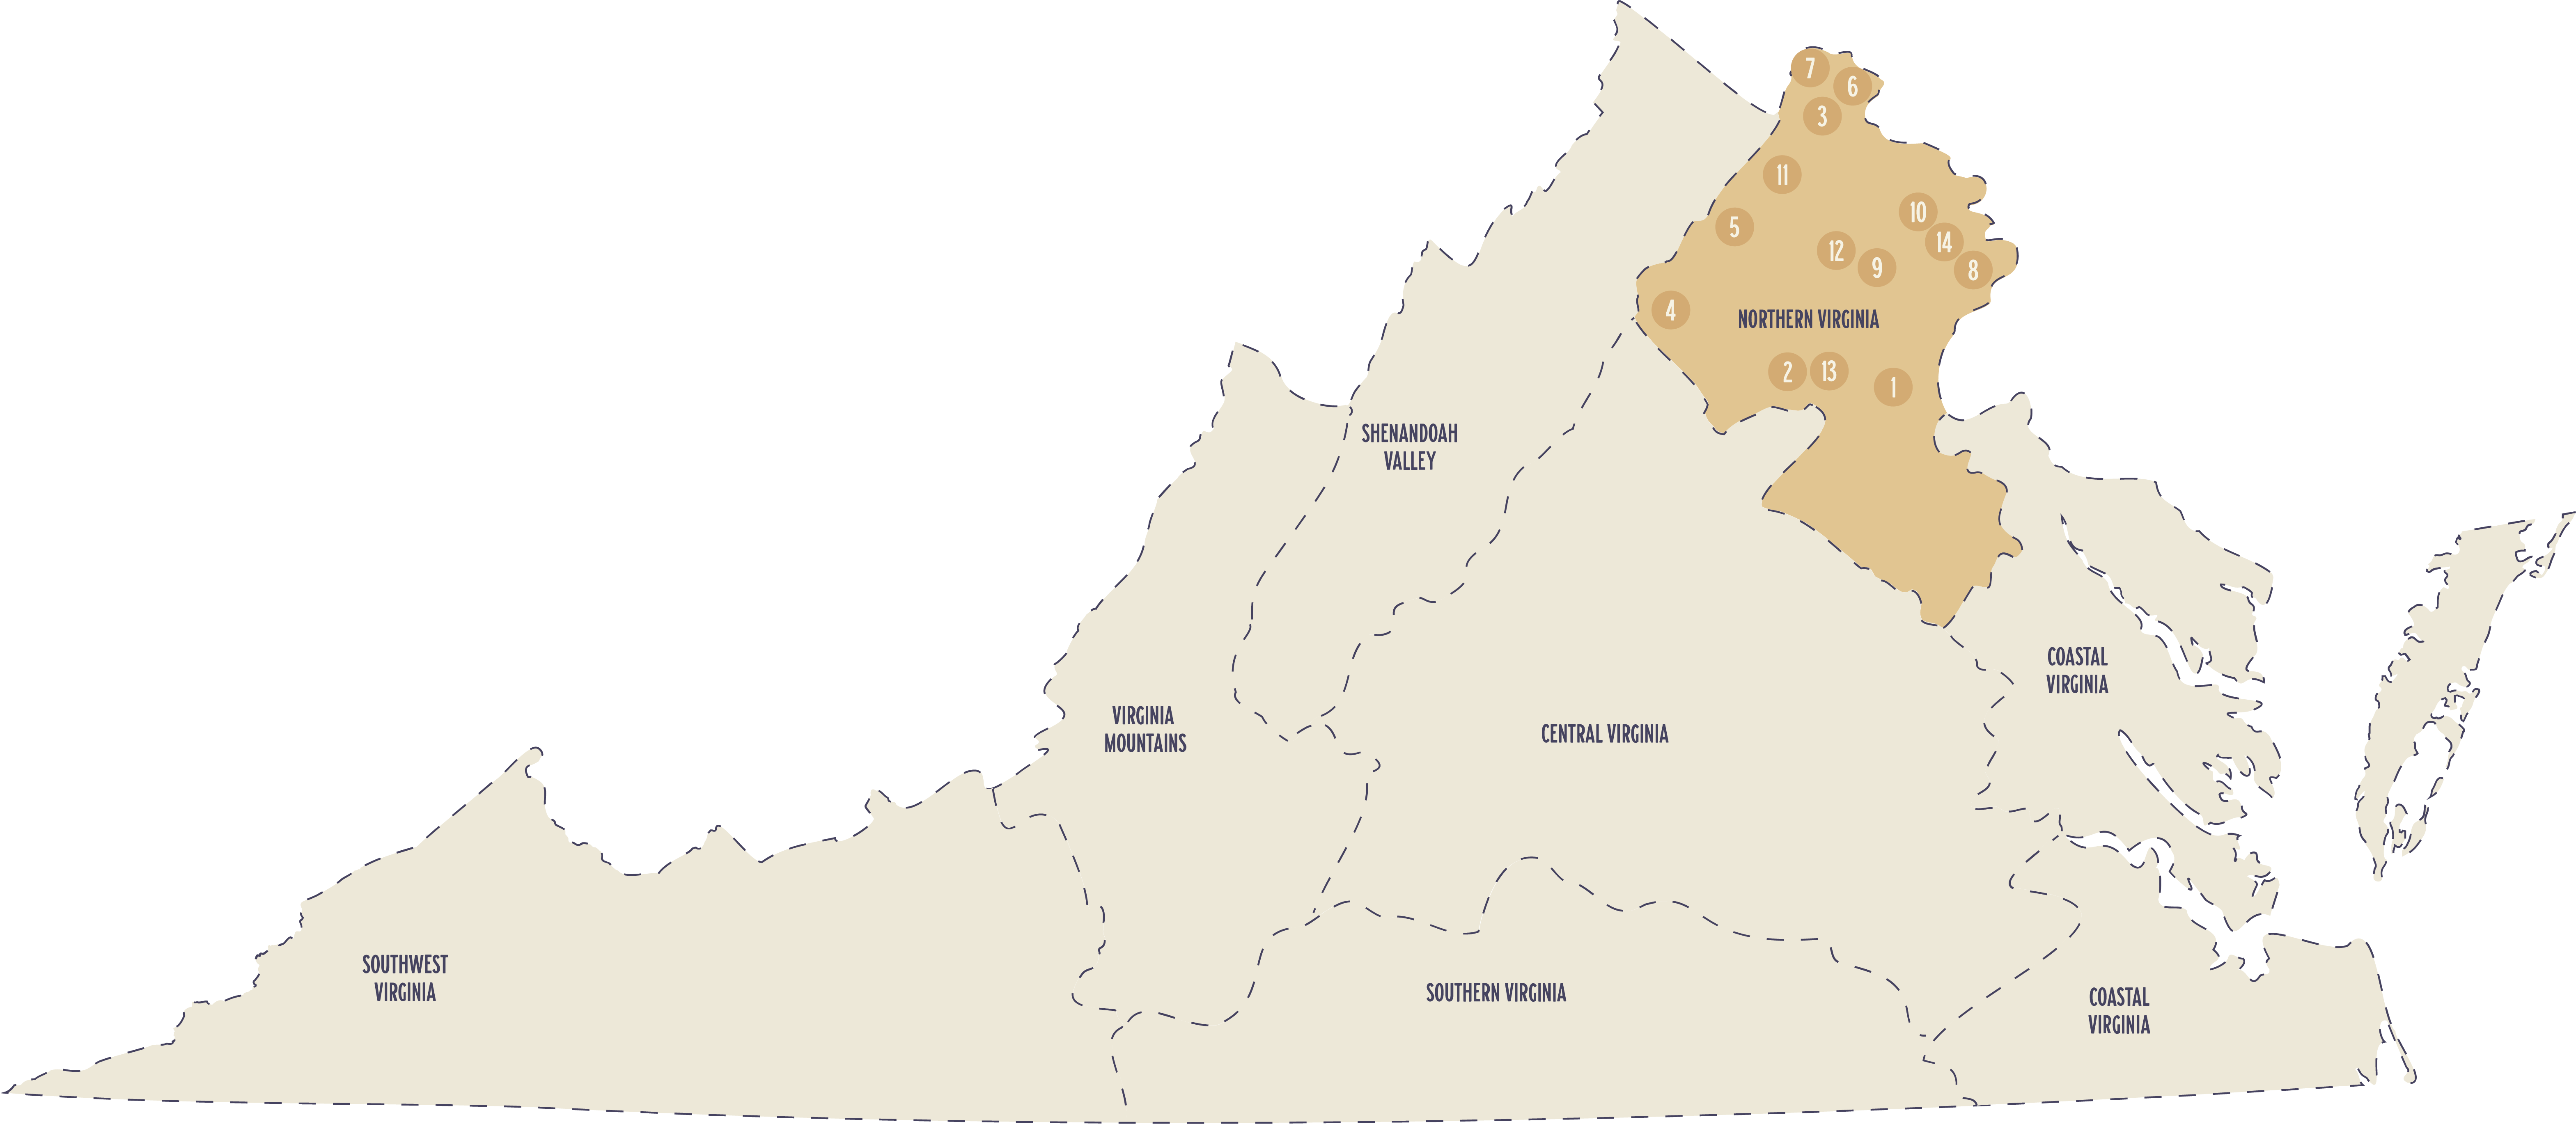 Northern Virginia – Virginia distilleries map – OUT OF DATE copy